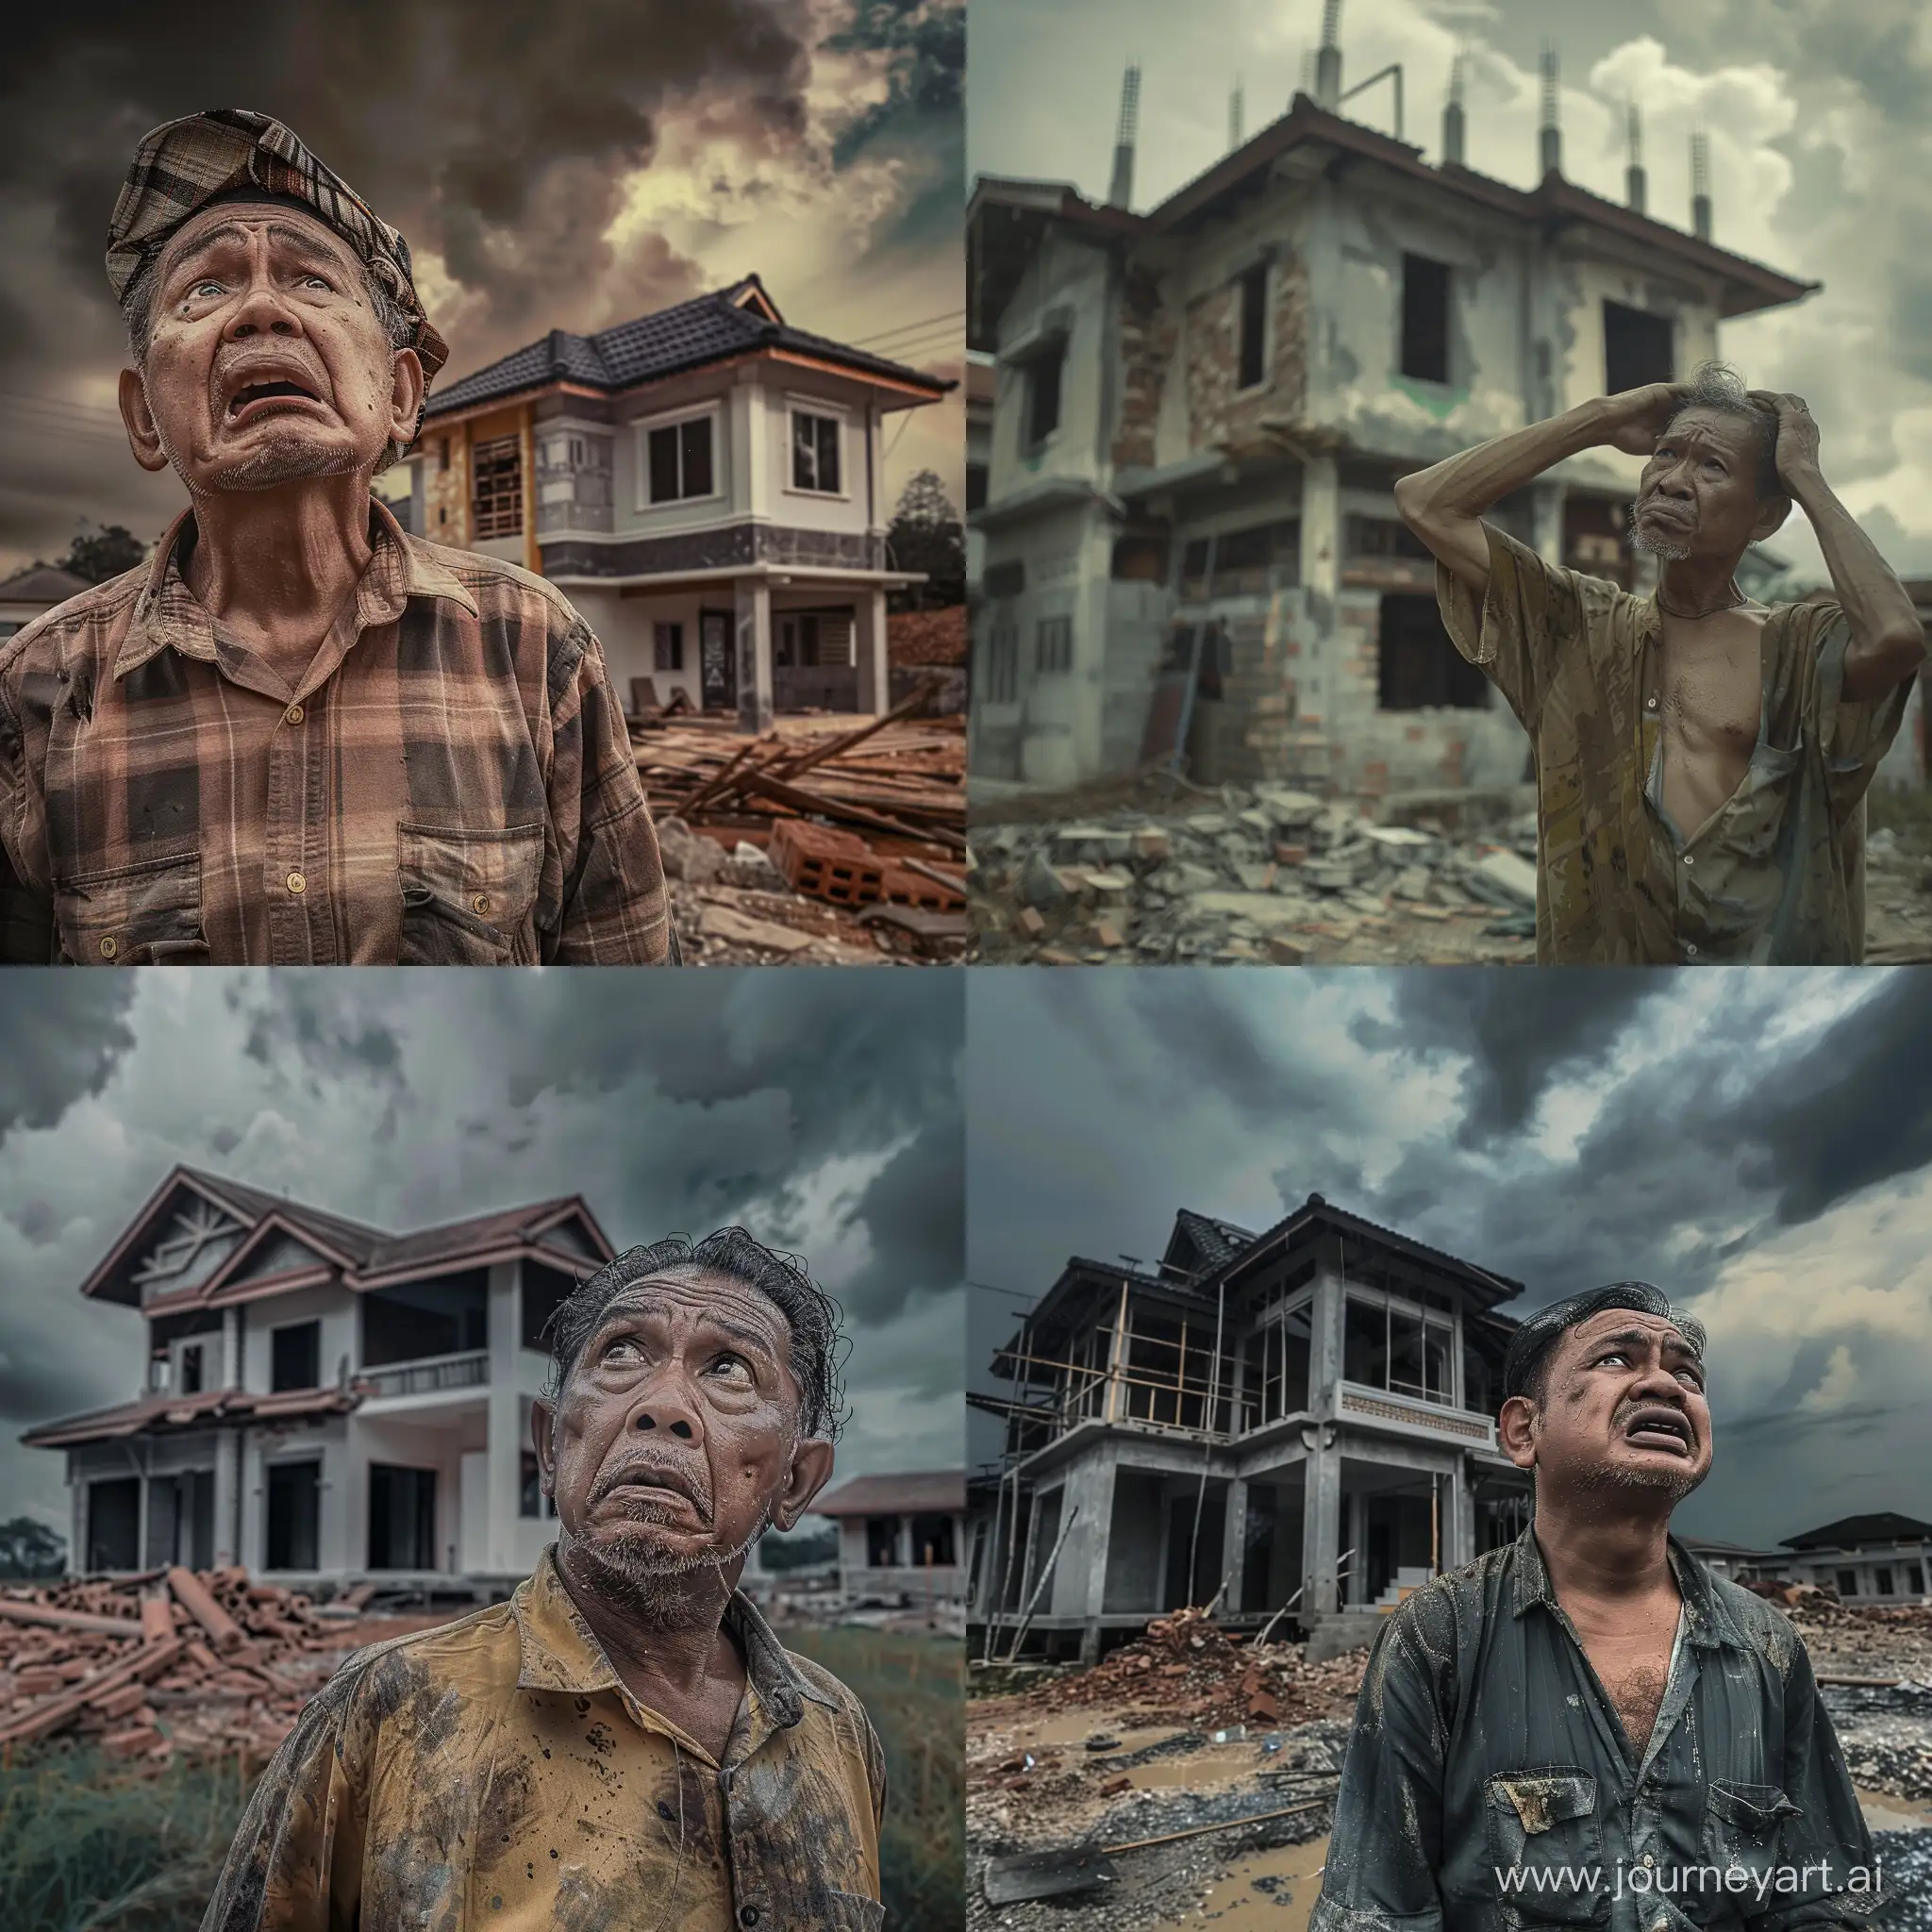 ultra realistic, a malay contractor only sees a man who is upset with the condition of his unfinished house, in front of an unfinished house, canon eos-id x mark iii dslr --v 6.0

